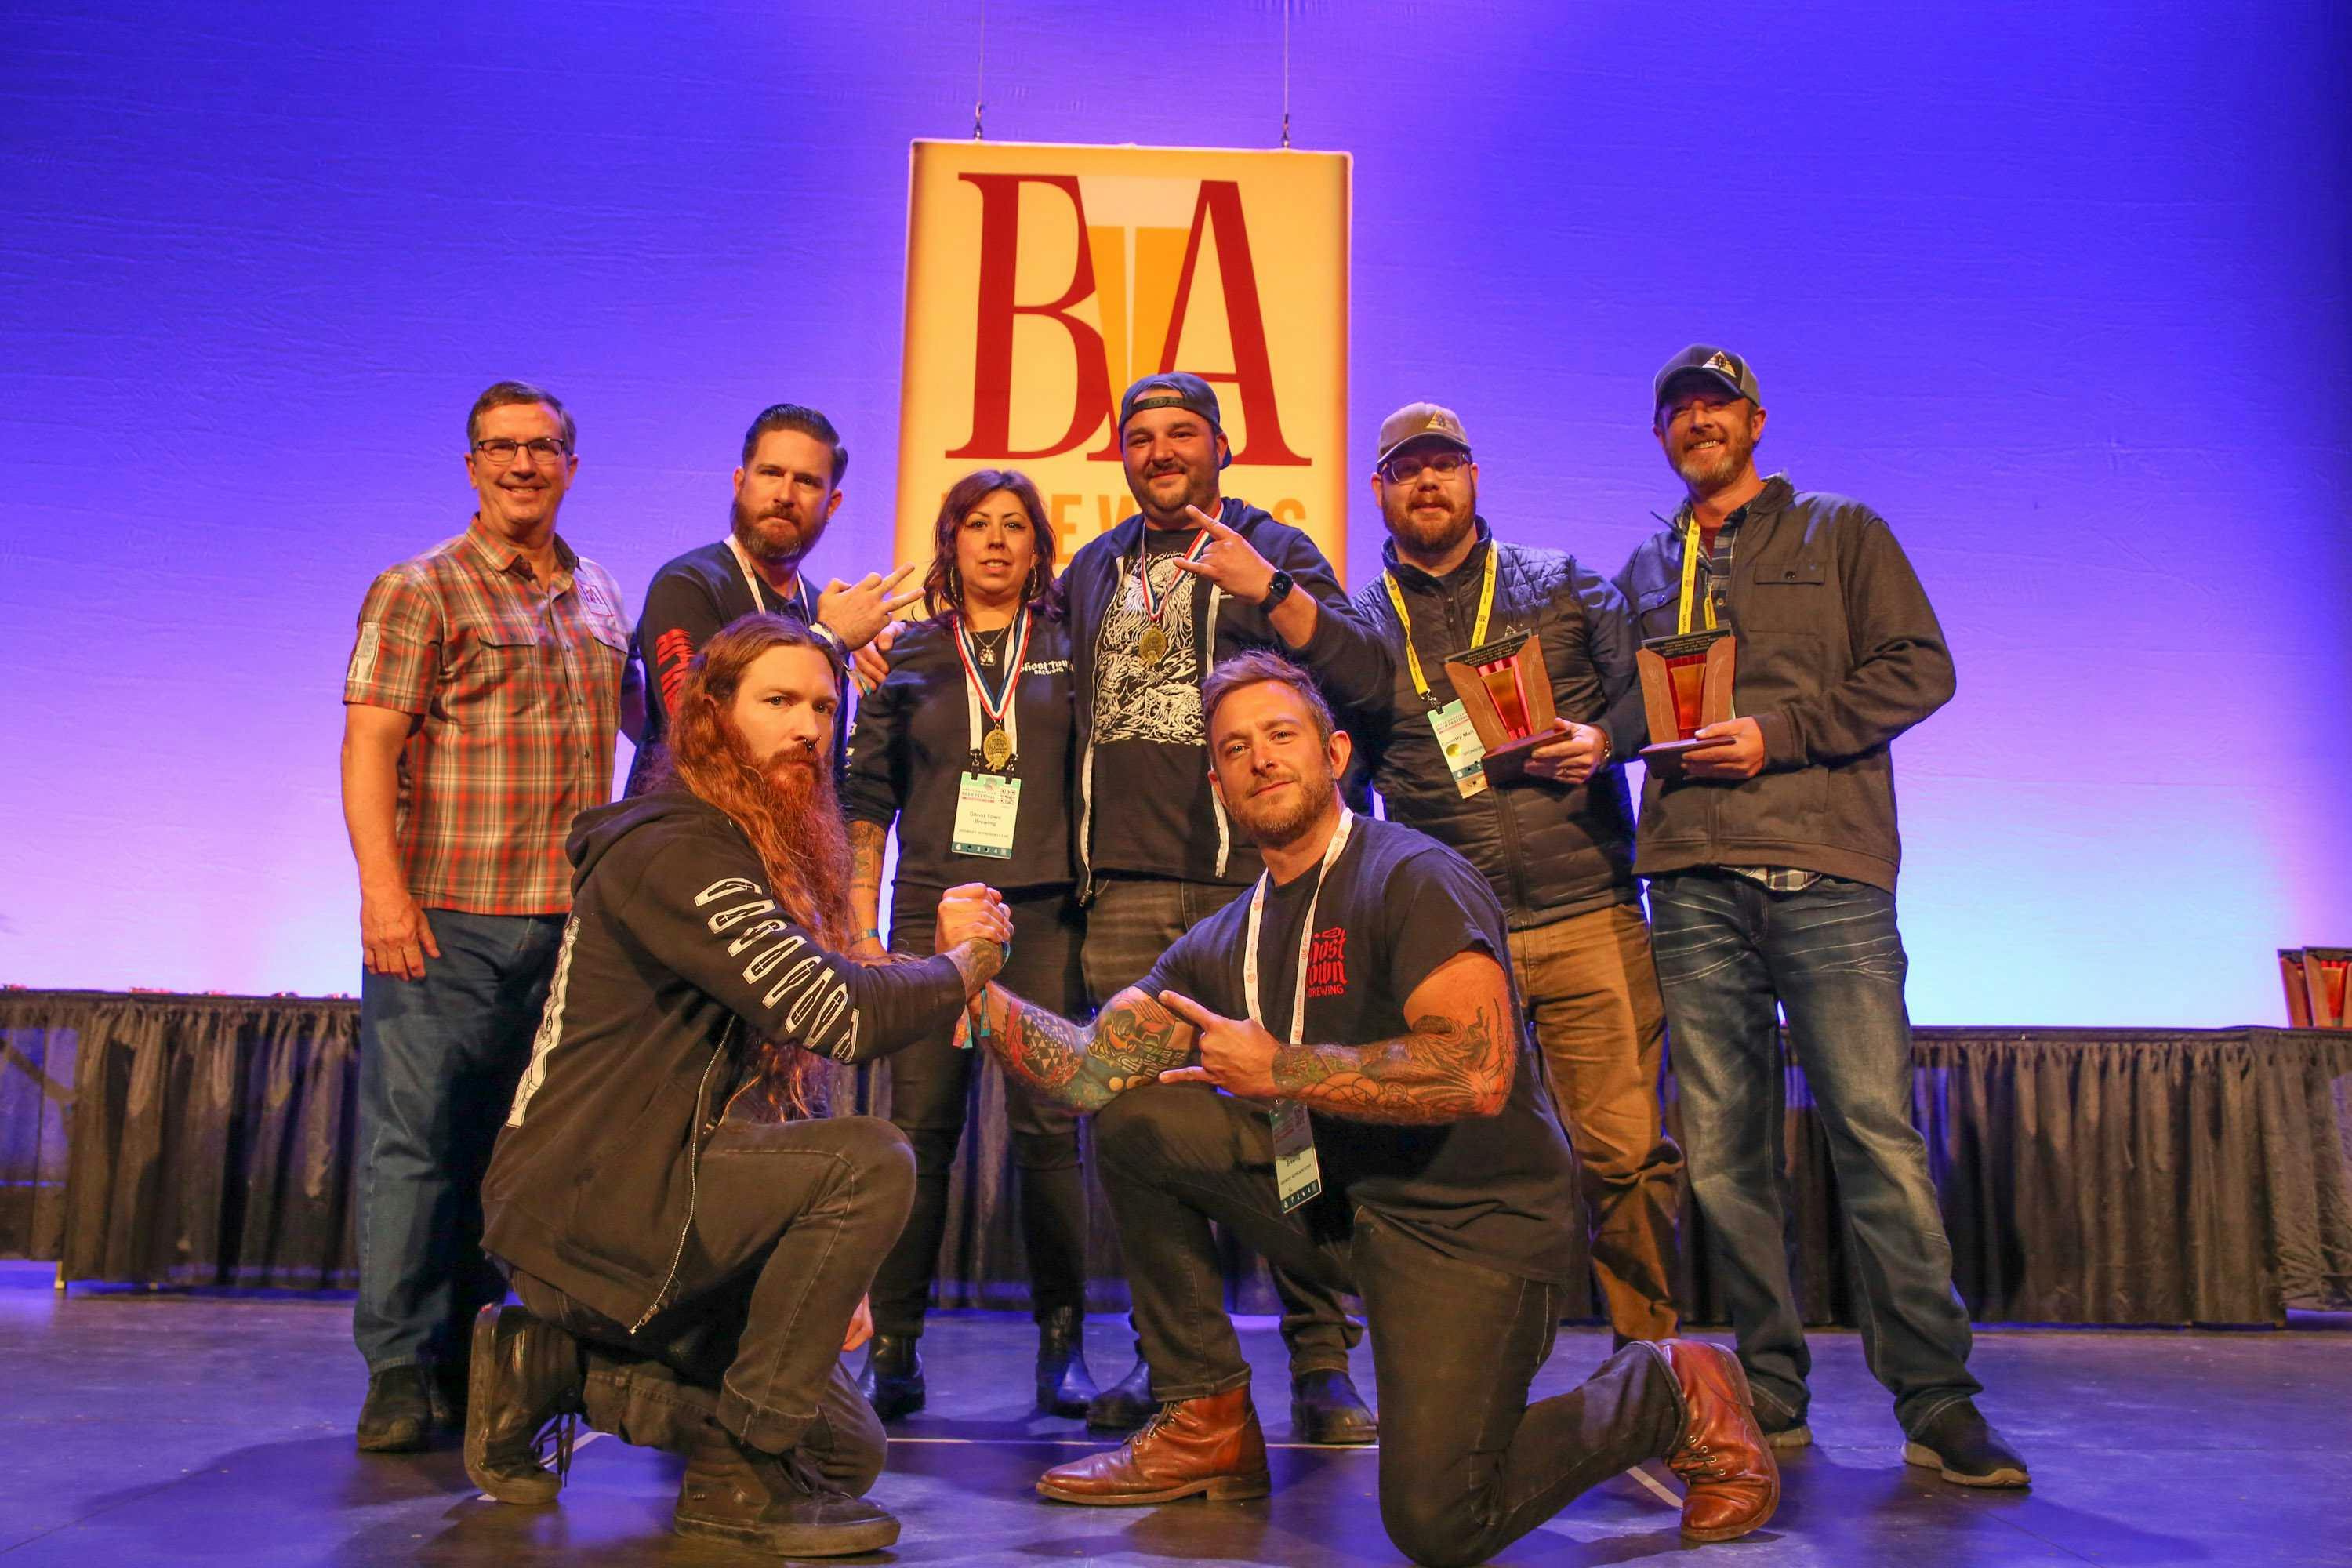 The Ghost Town team poses with their winning medals and trophies at the 2022 Great American Beer Festival